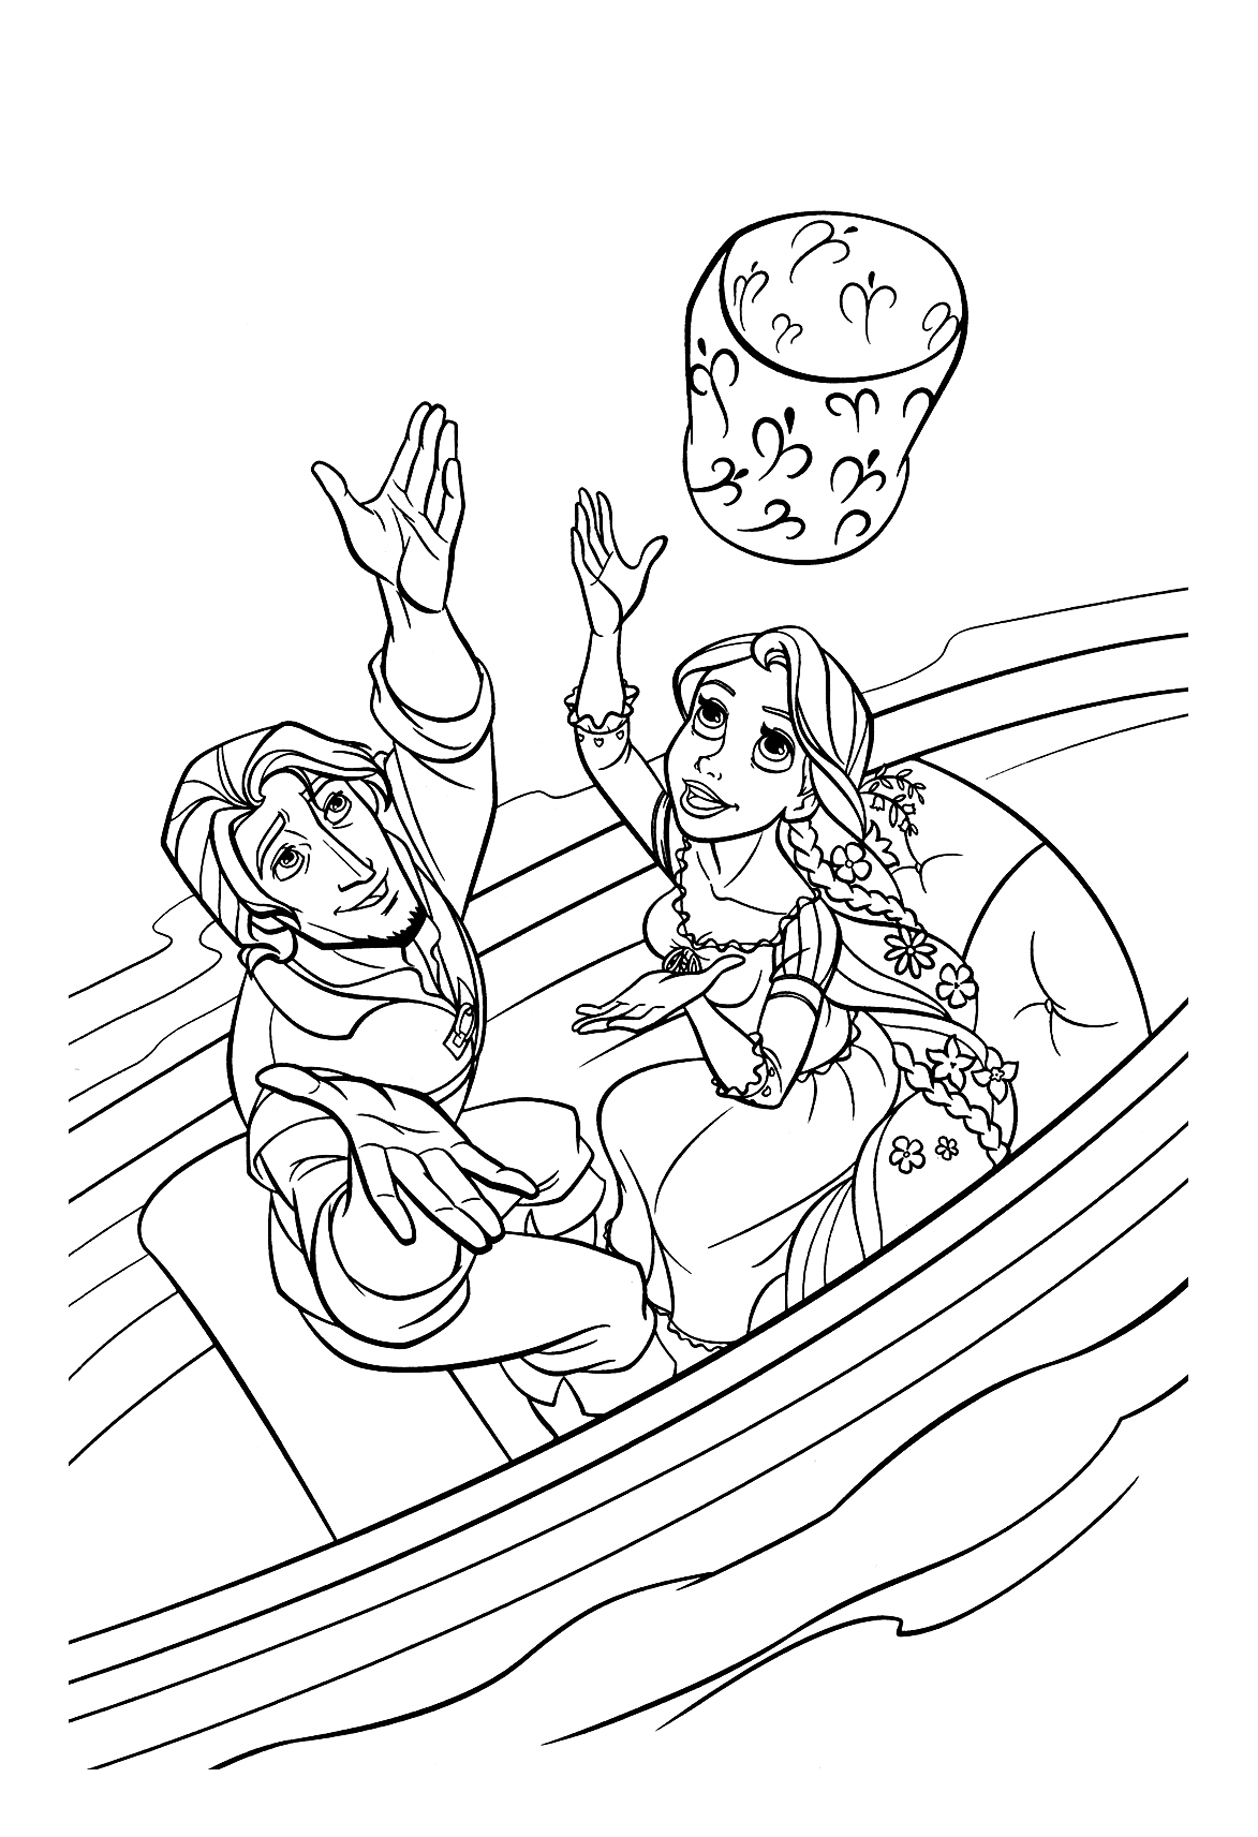 Tangled For Children Tangled Kids Coloring Pages